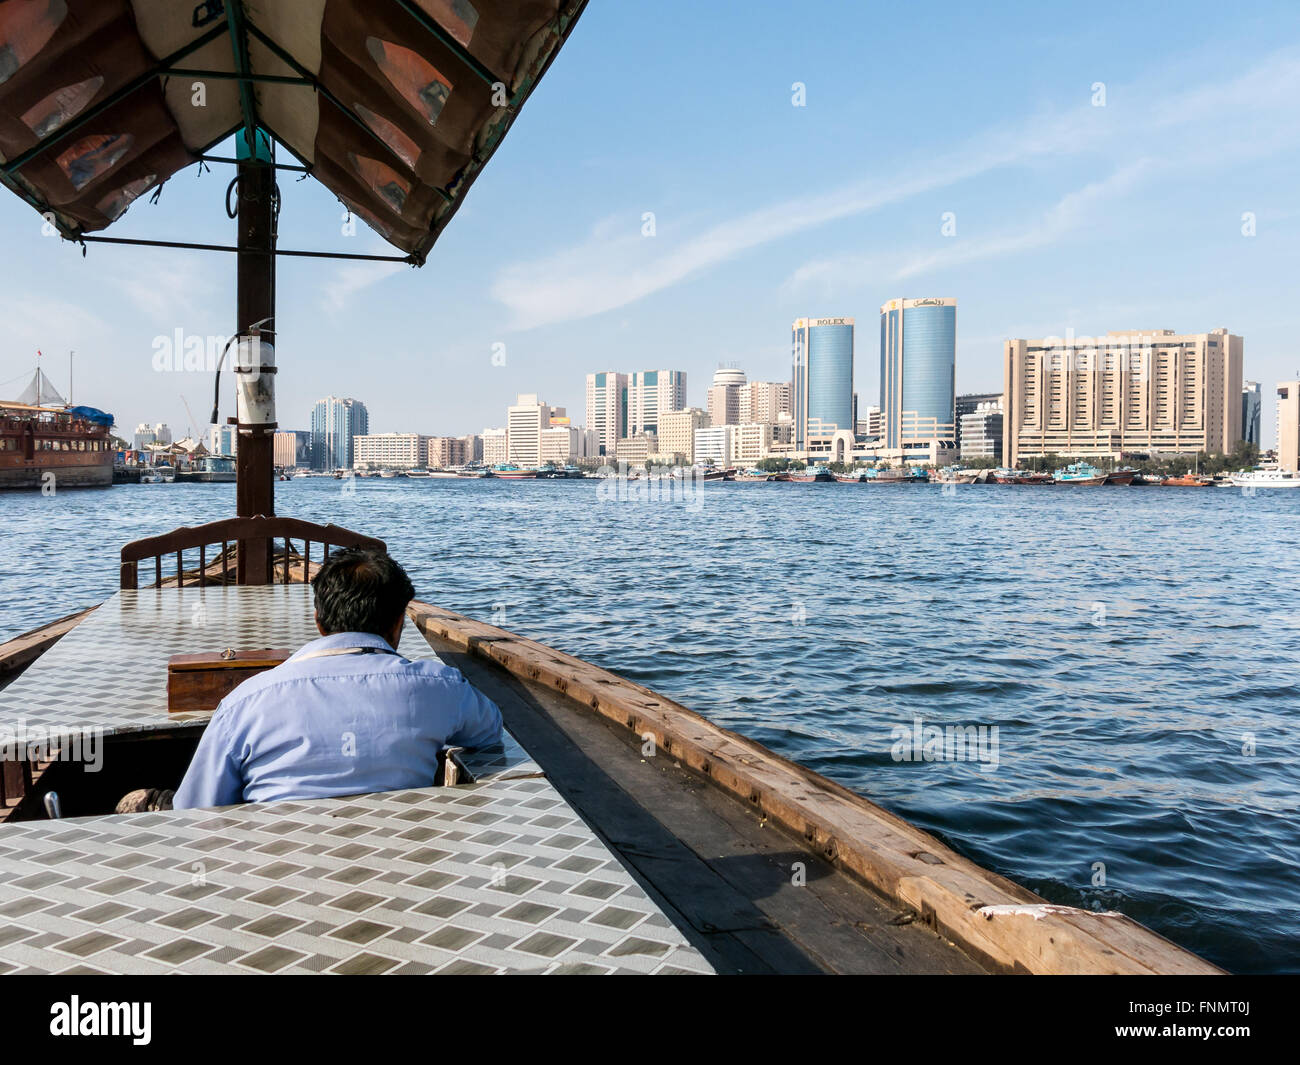 View from abra water taxi on The Creek to Central Business District Rigga Al Buteen in Dubai, United Arab Emirates Stock Photo